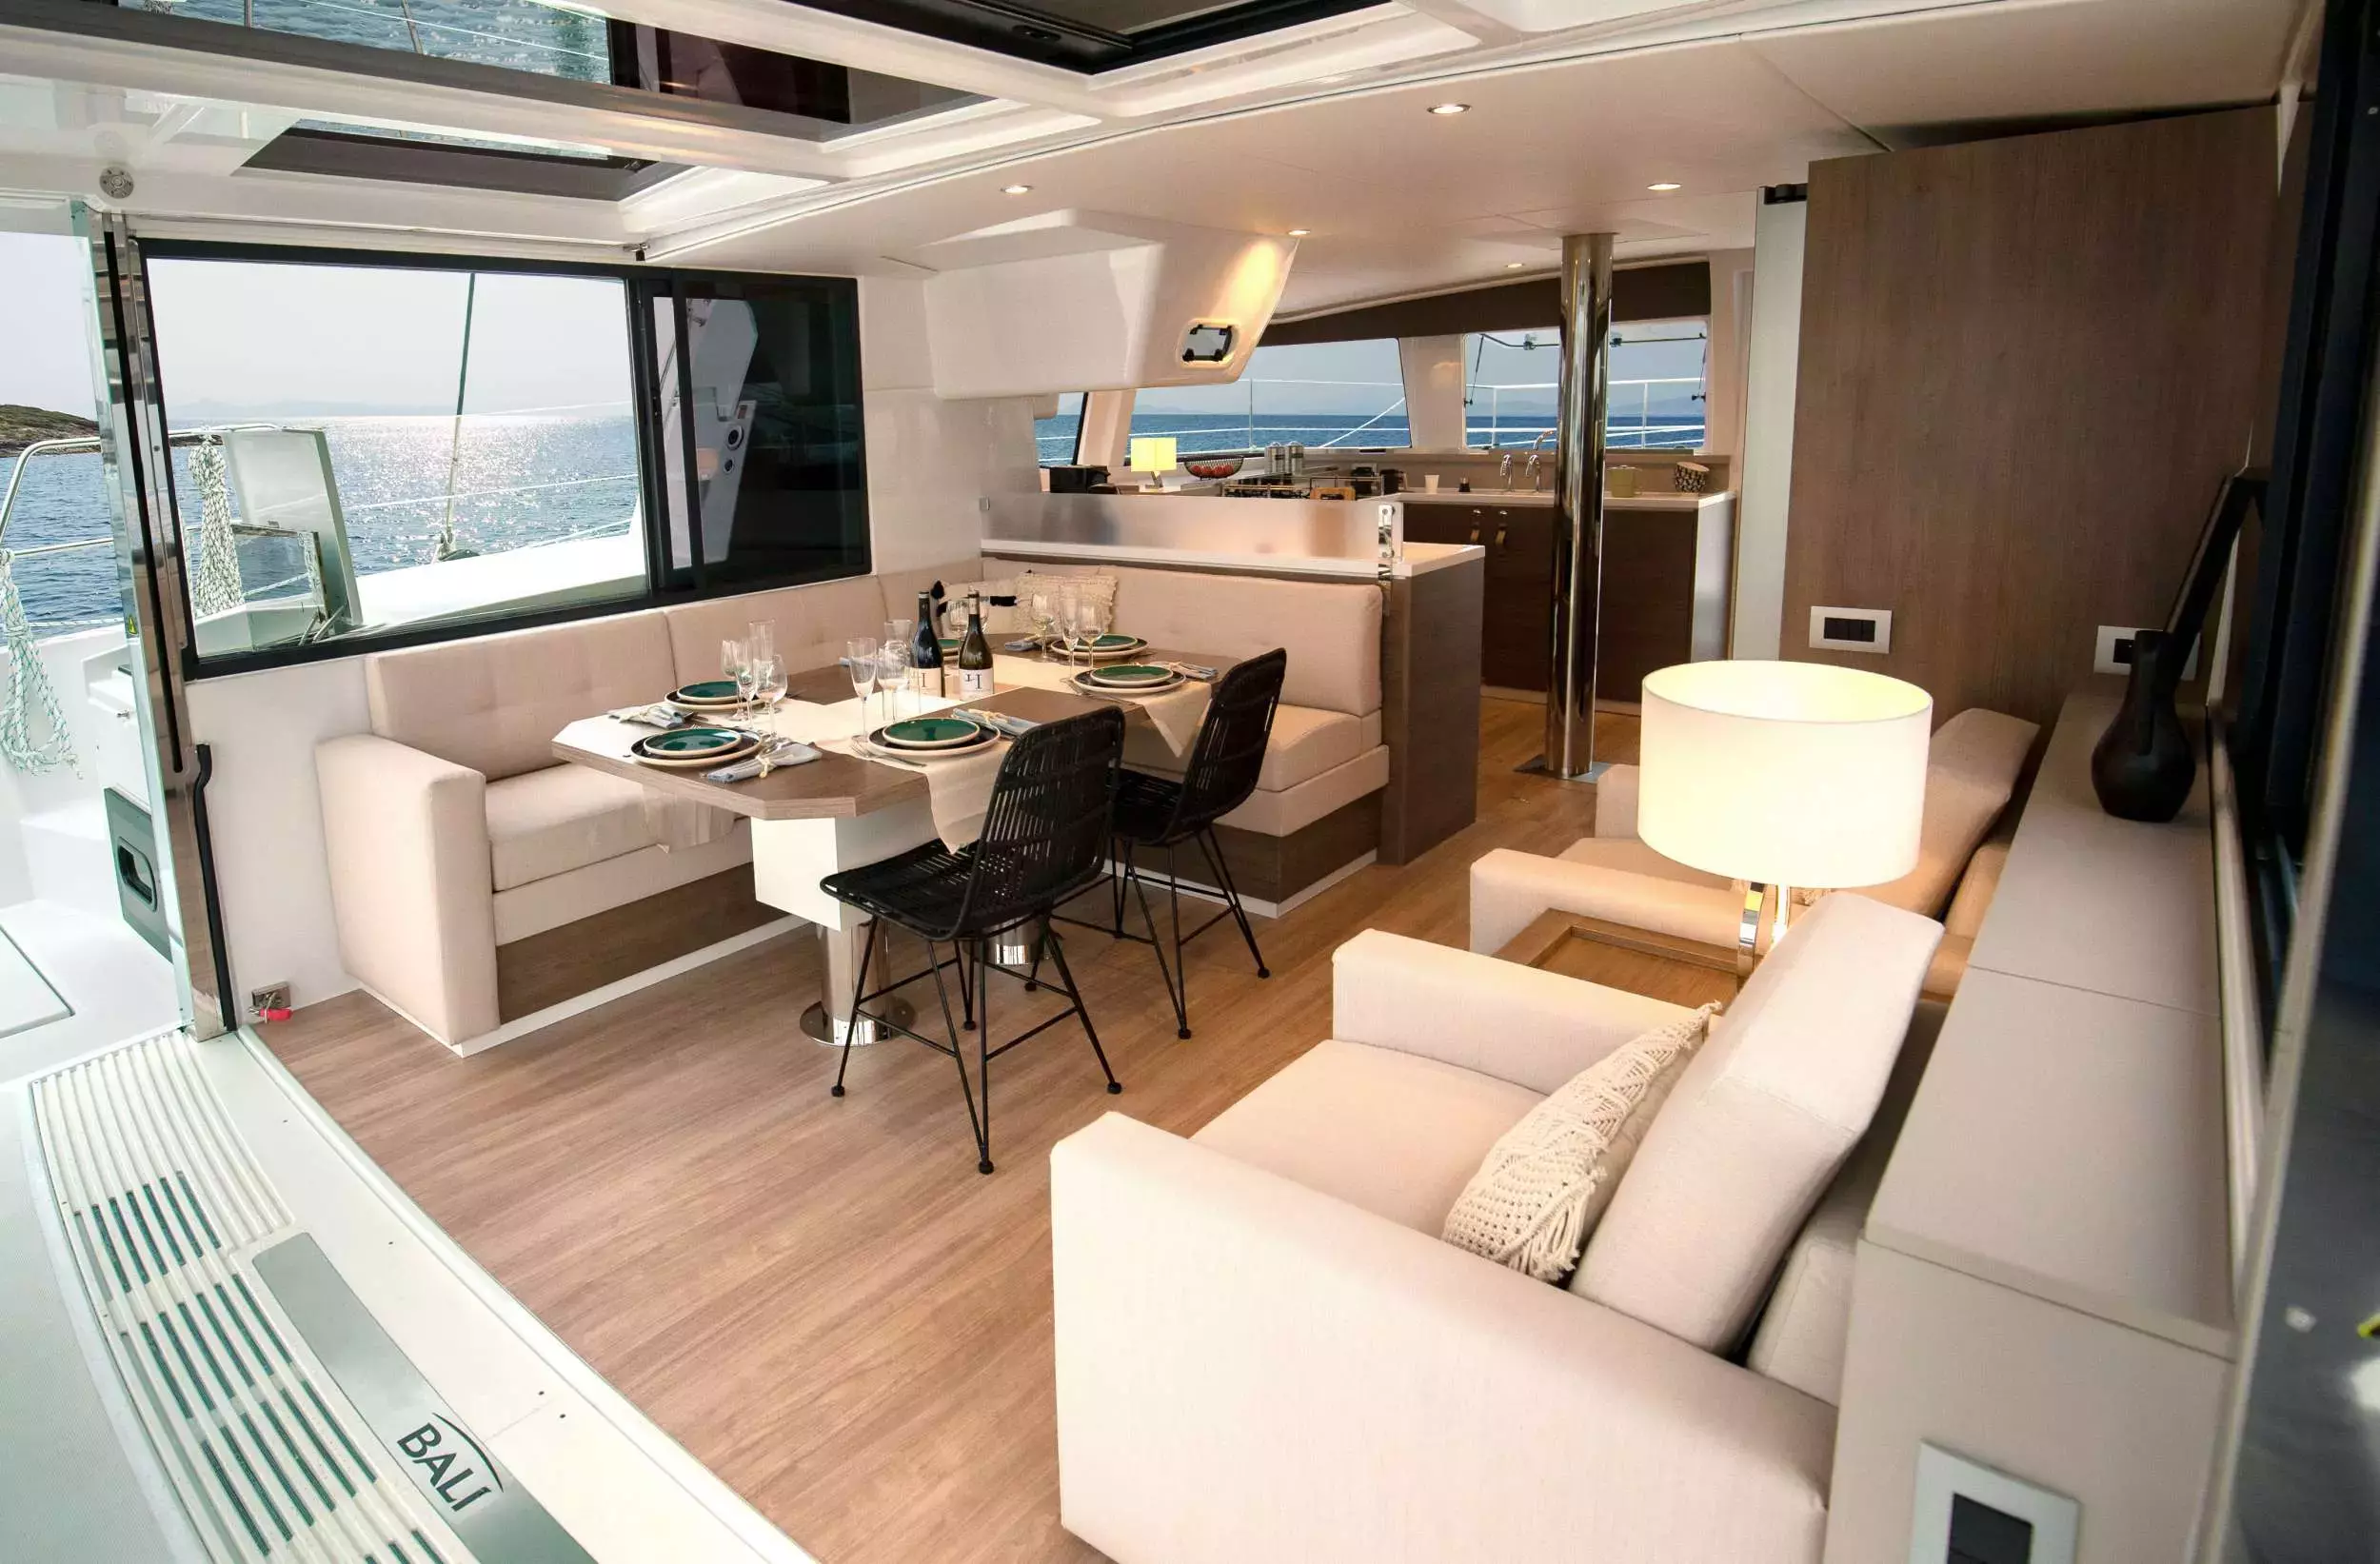 Knowker by Bali Catamarans - Top rates for a Charter of a private Sailing Catamaran in Spain